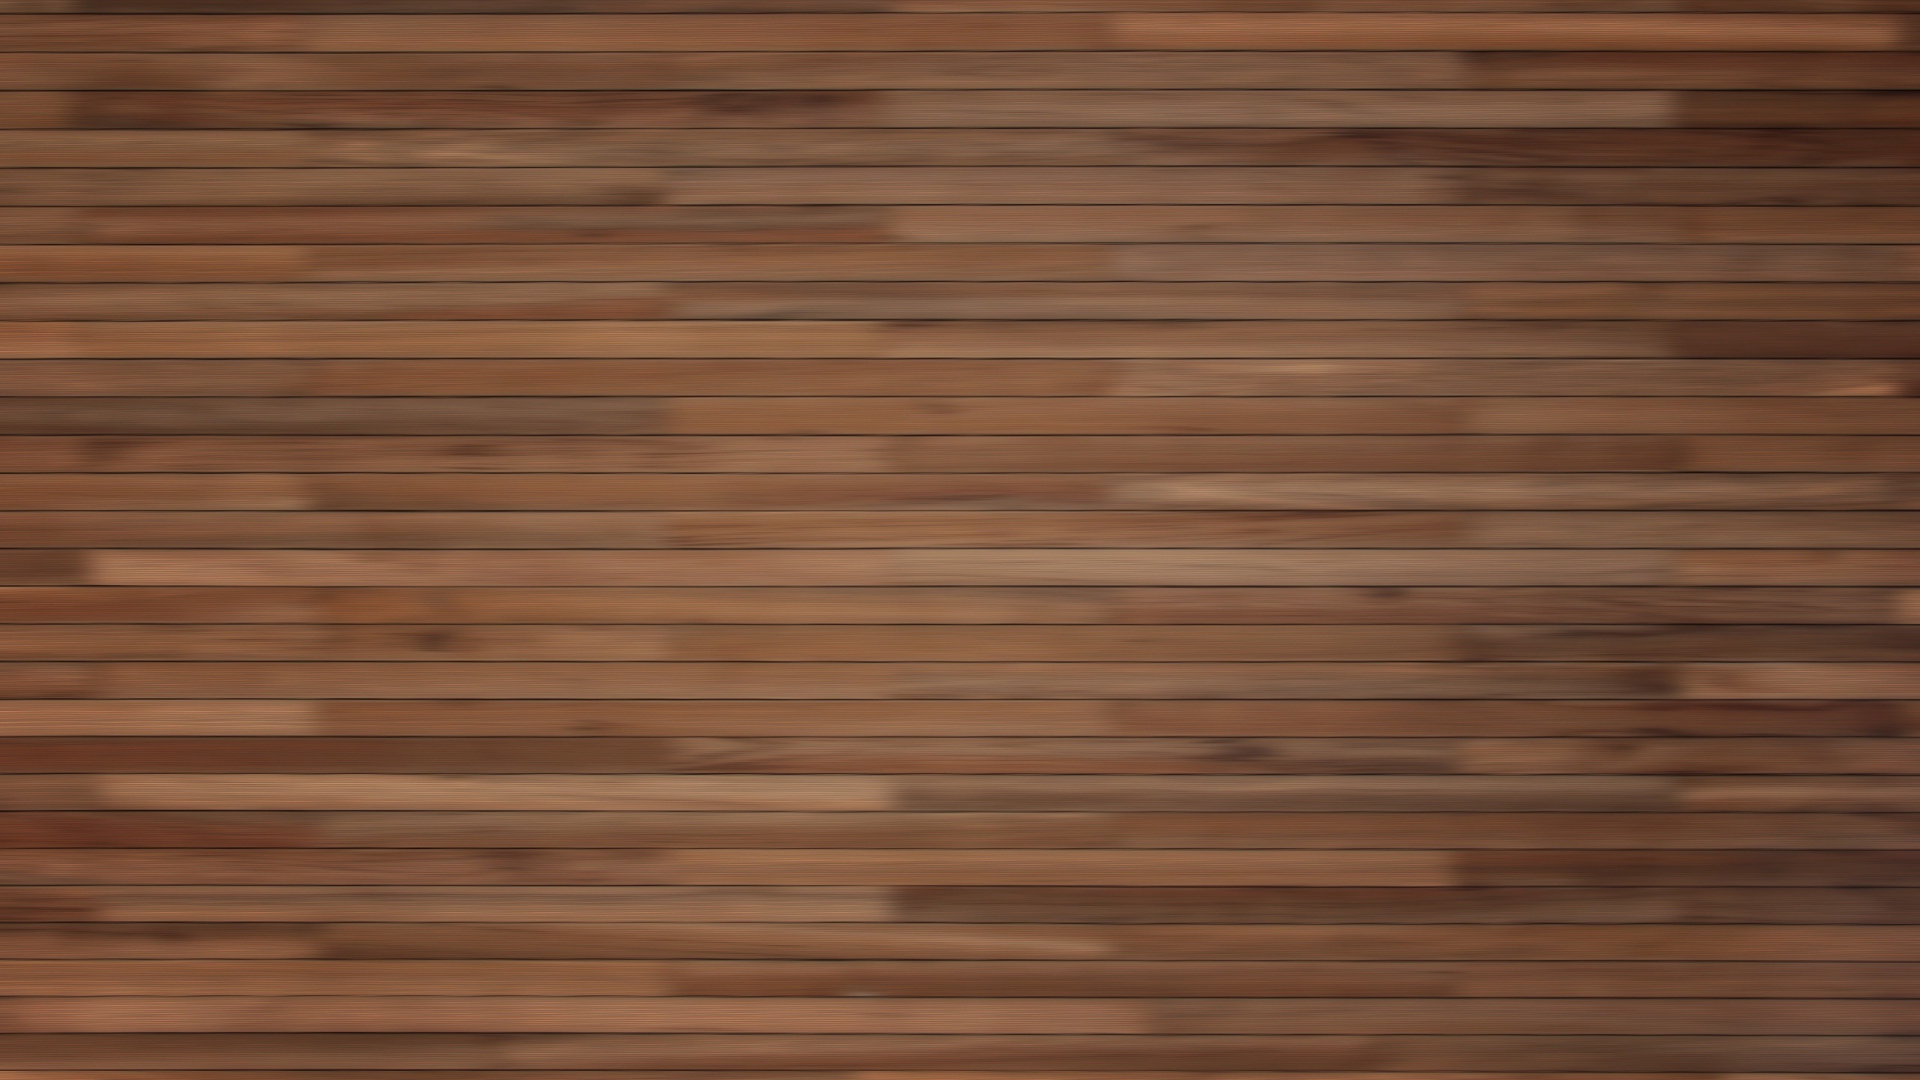 Wood Bright Stripes Vertical Wallpaper Background Full HD 1080p